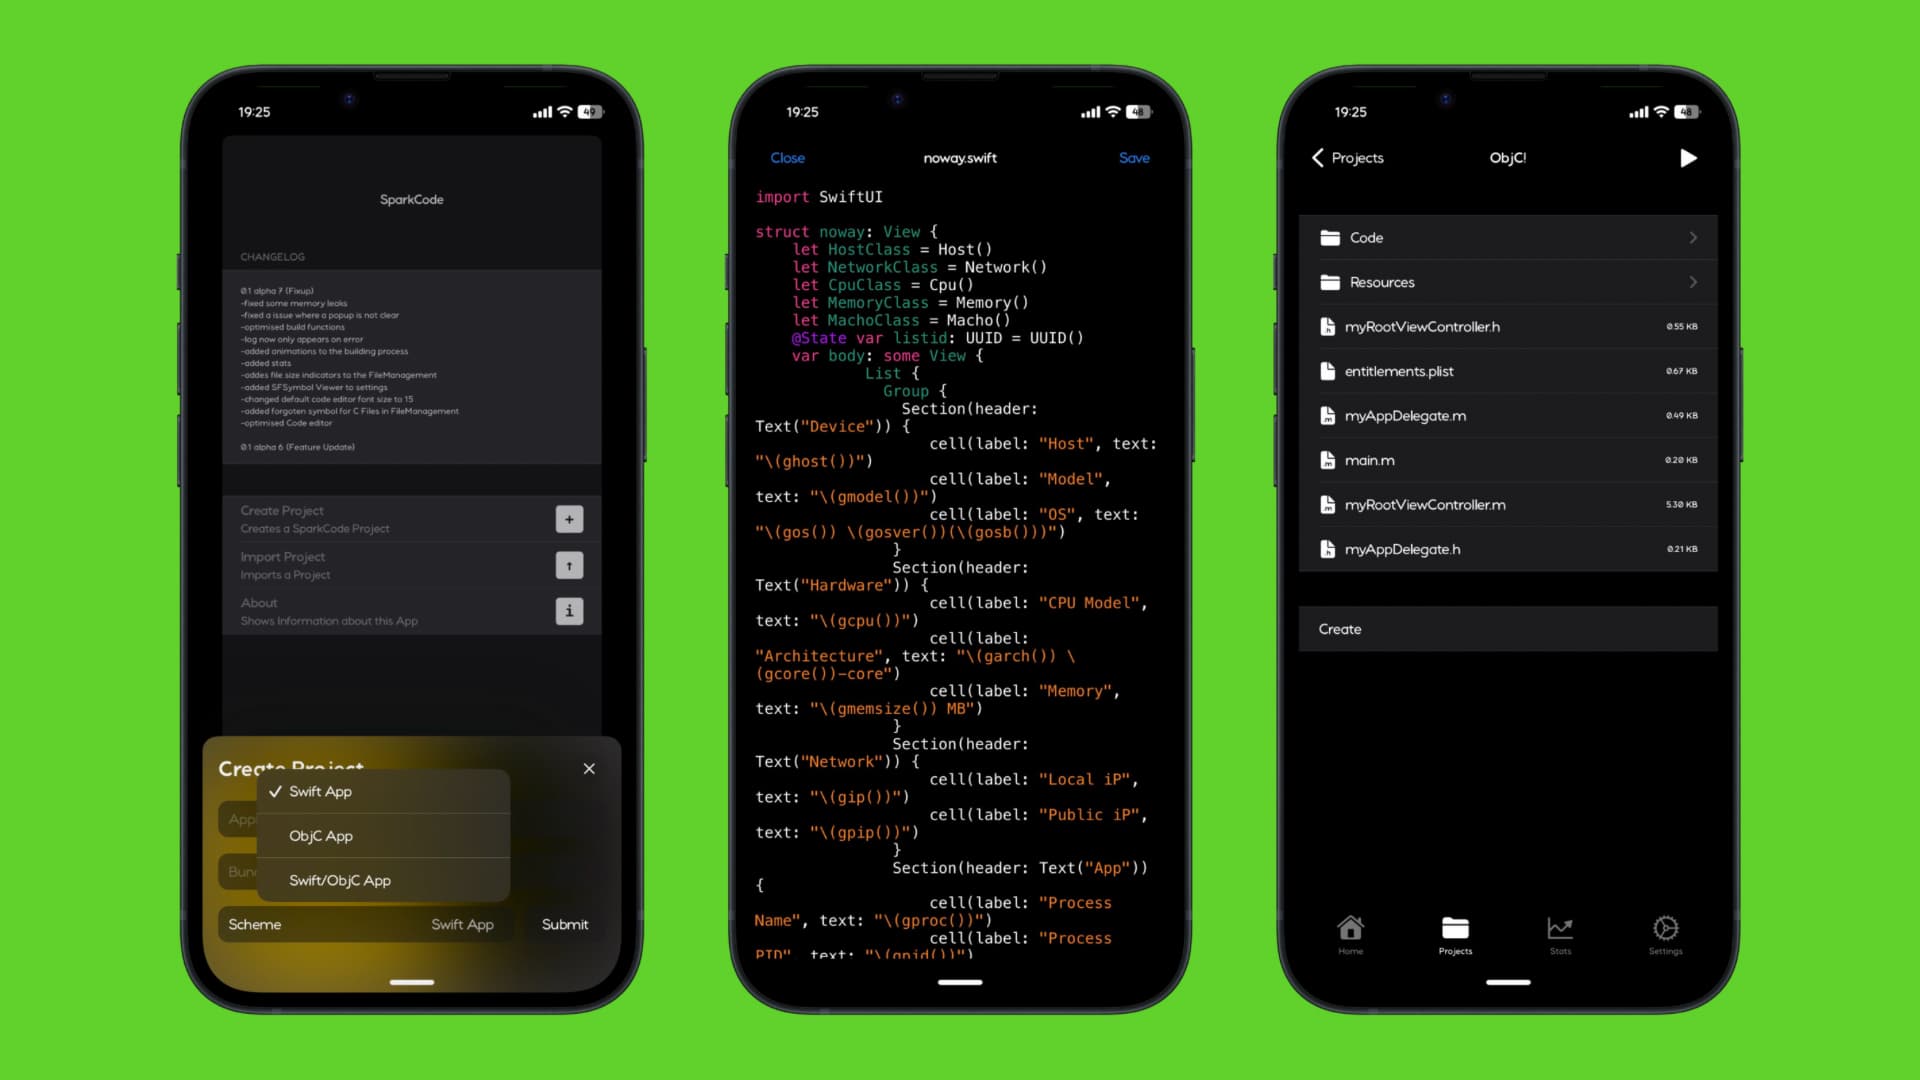 SparkCode lets jailbroken iPhone users write code & compile Swift or C-based apps without a computer or Xcode